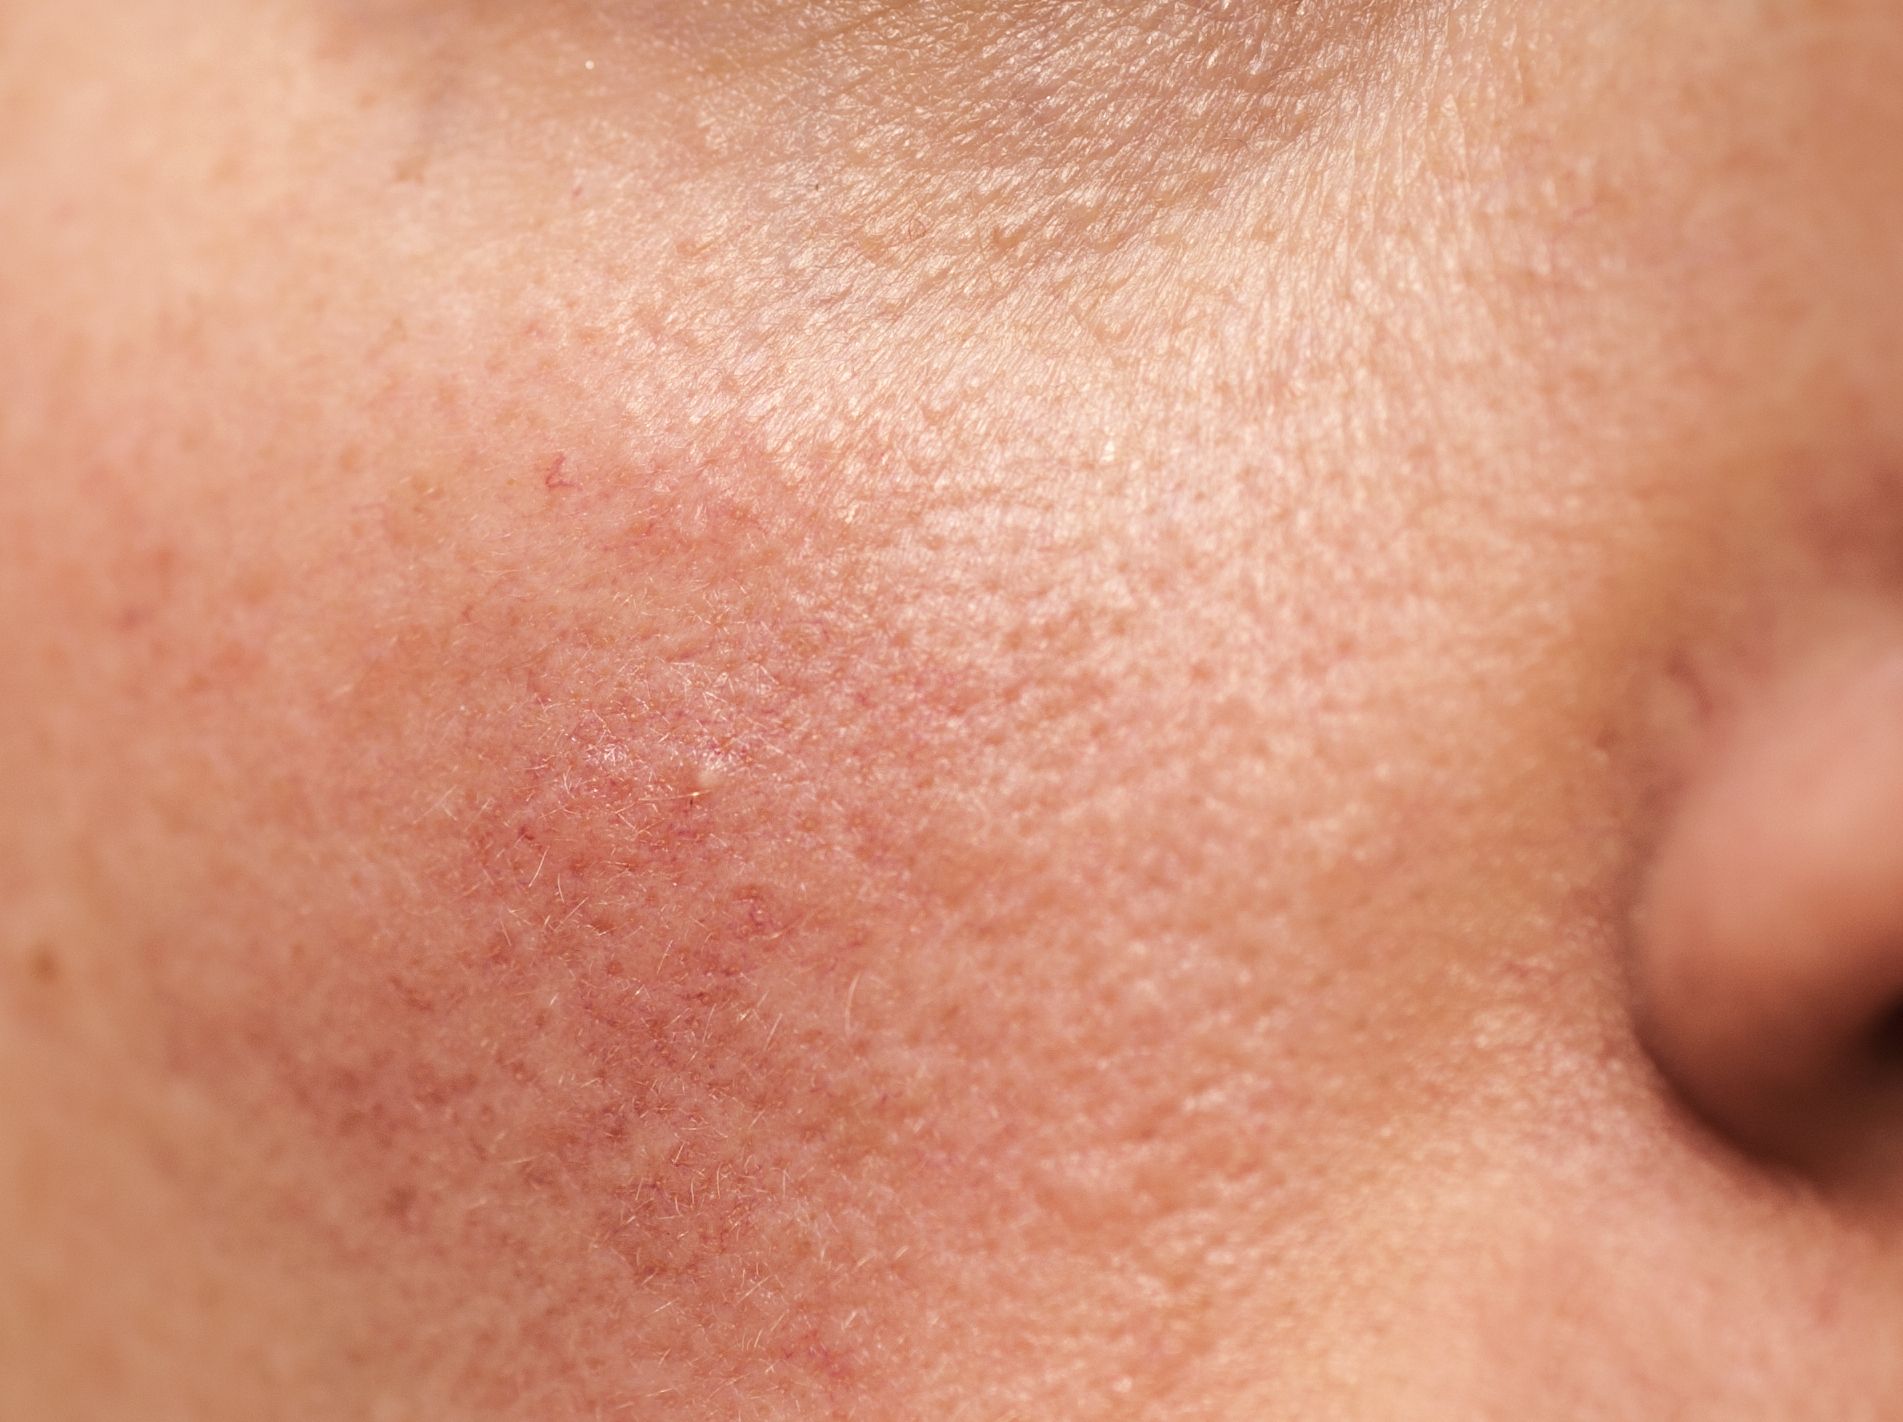 Get Rid of Redness On Face Causes and Treatments, Per Dermatologists pic